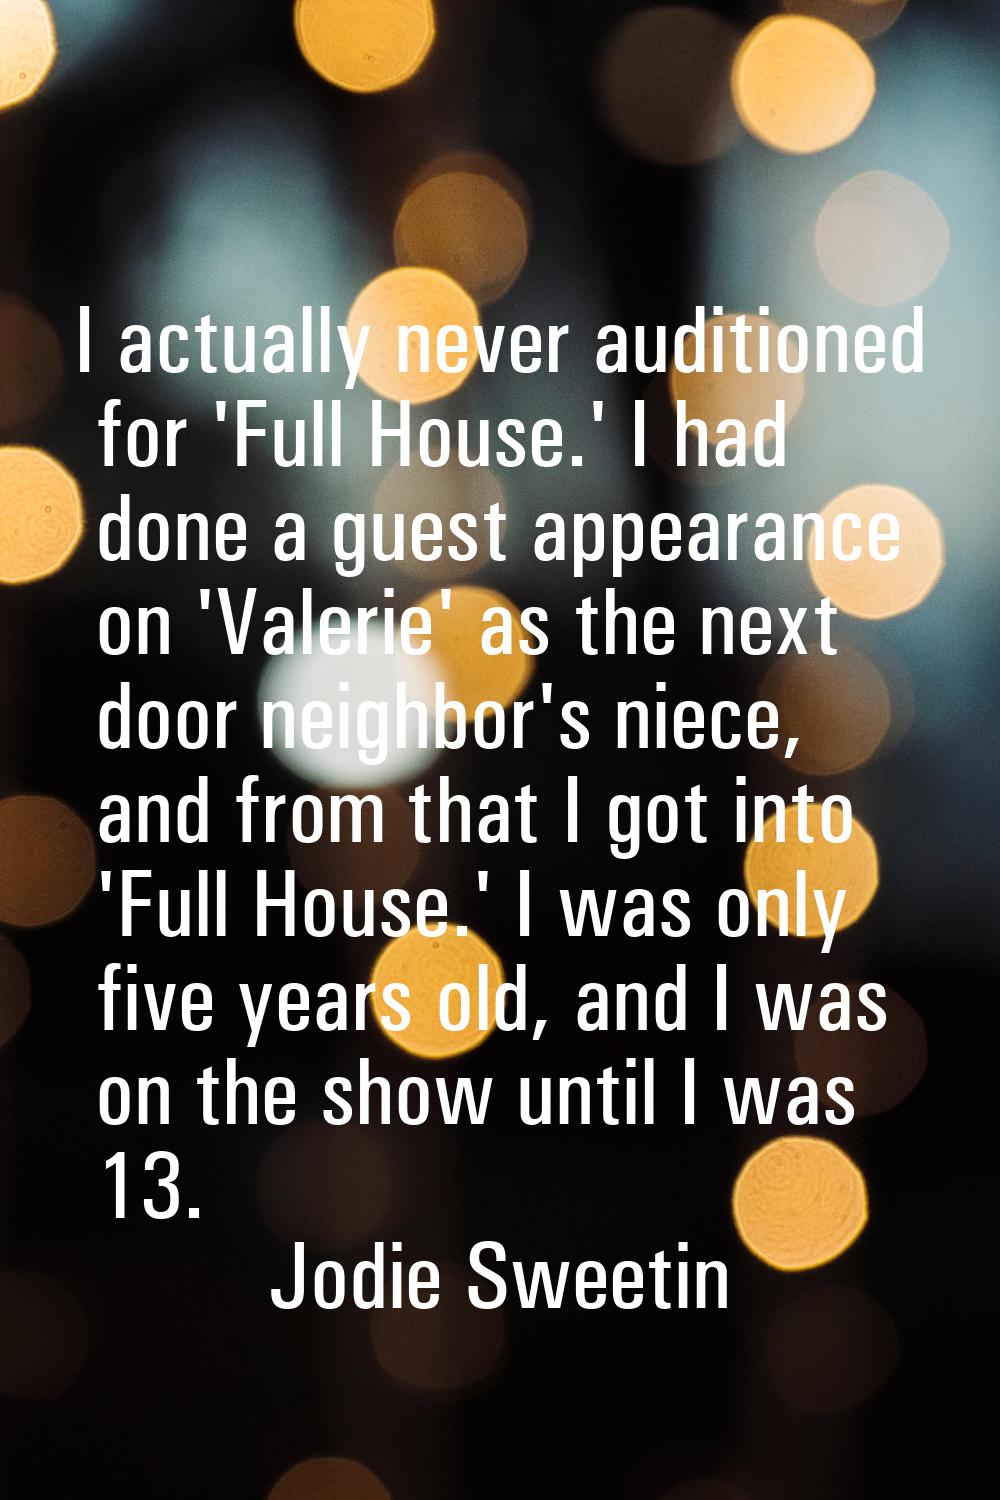 I actually never auditioned for 'Full House.' I had done a guest appearance on 'Valerie' as the nex